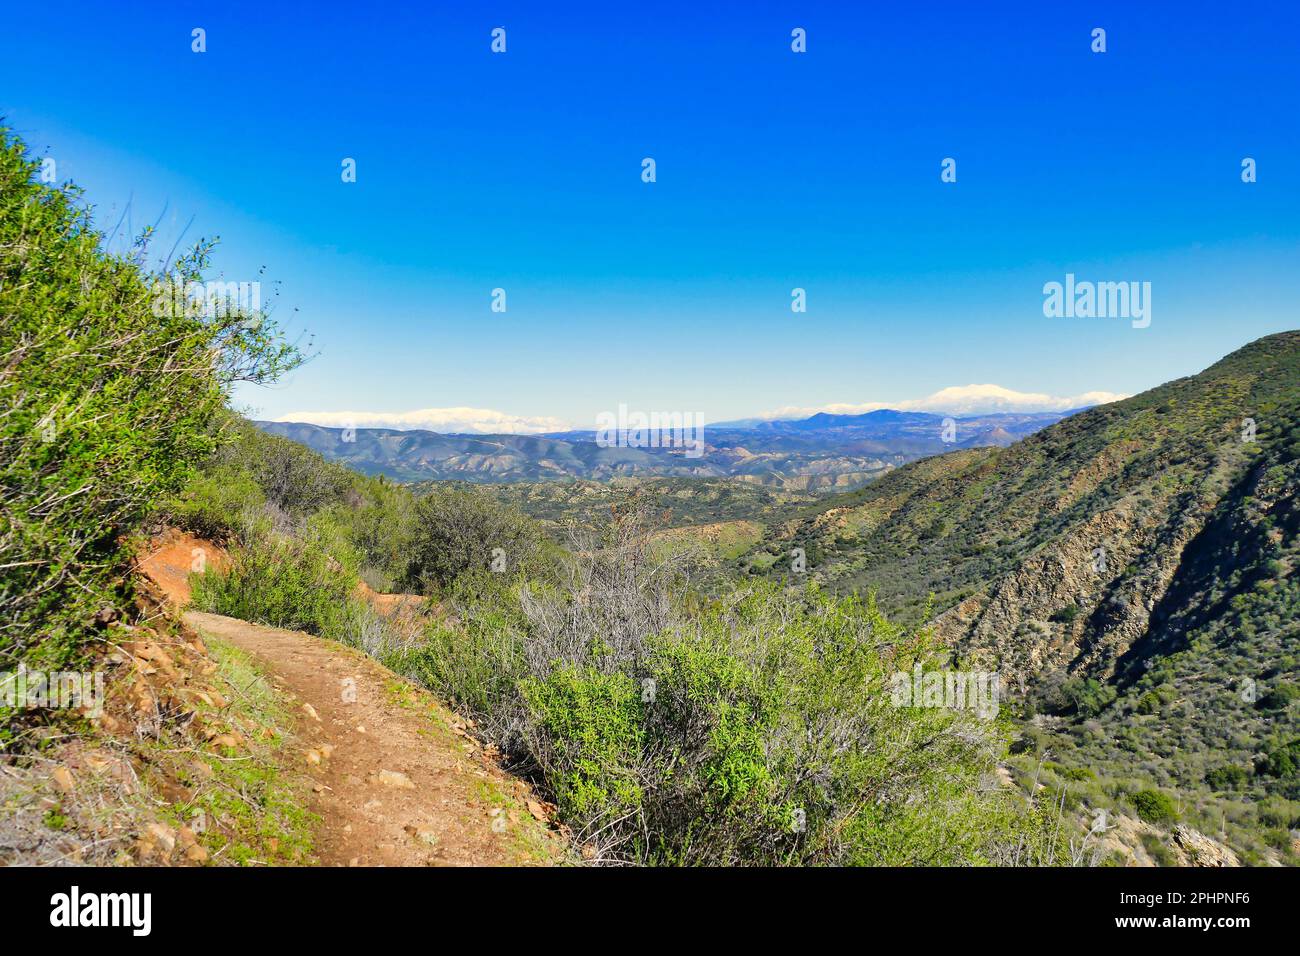 Footpath through the Agua Tibia Wilderness in Cleveland National Forest, in the background the snowy peaks of the San Jacinto Mountains, California Stock Photo